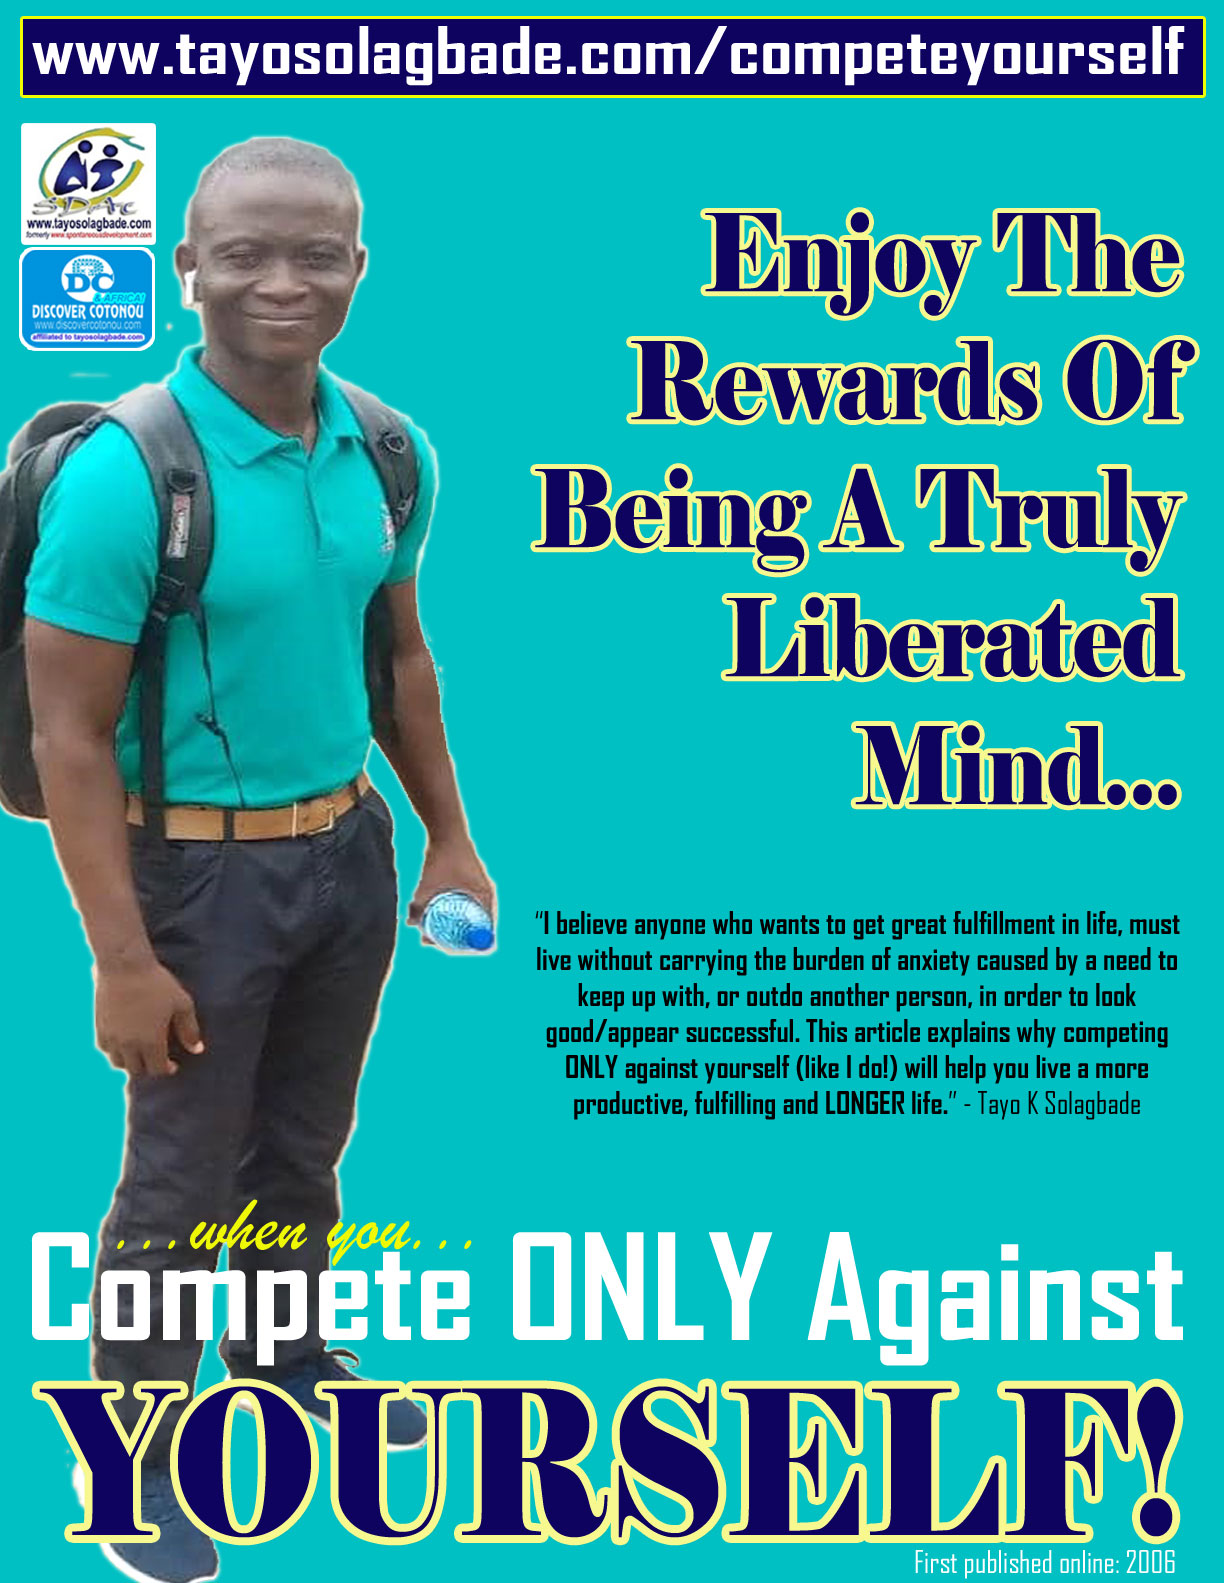 [FREE PDF] Compete ONLY Against Yourself – And Enjoy The Rewards Of Being A Truly Liberated Mind!